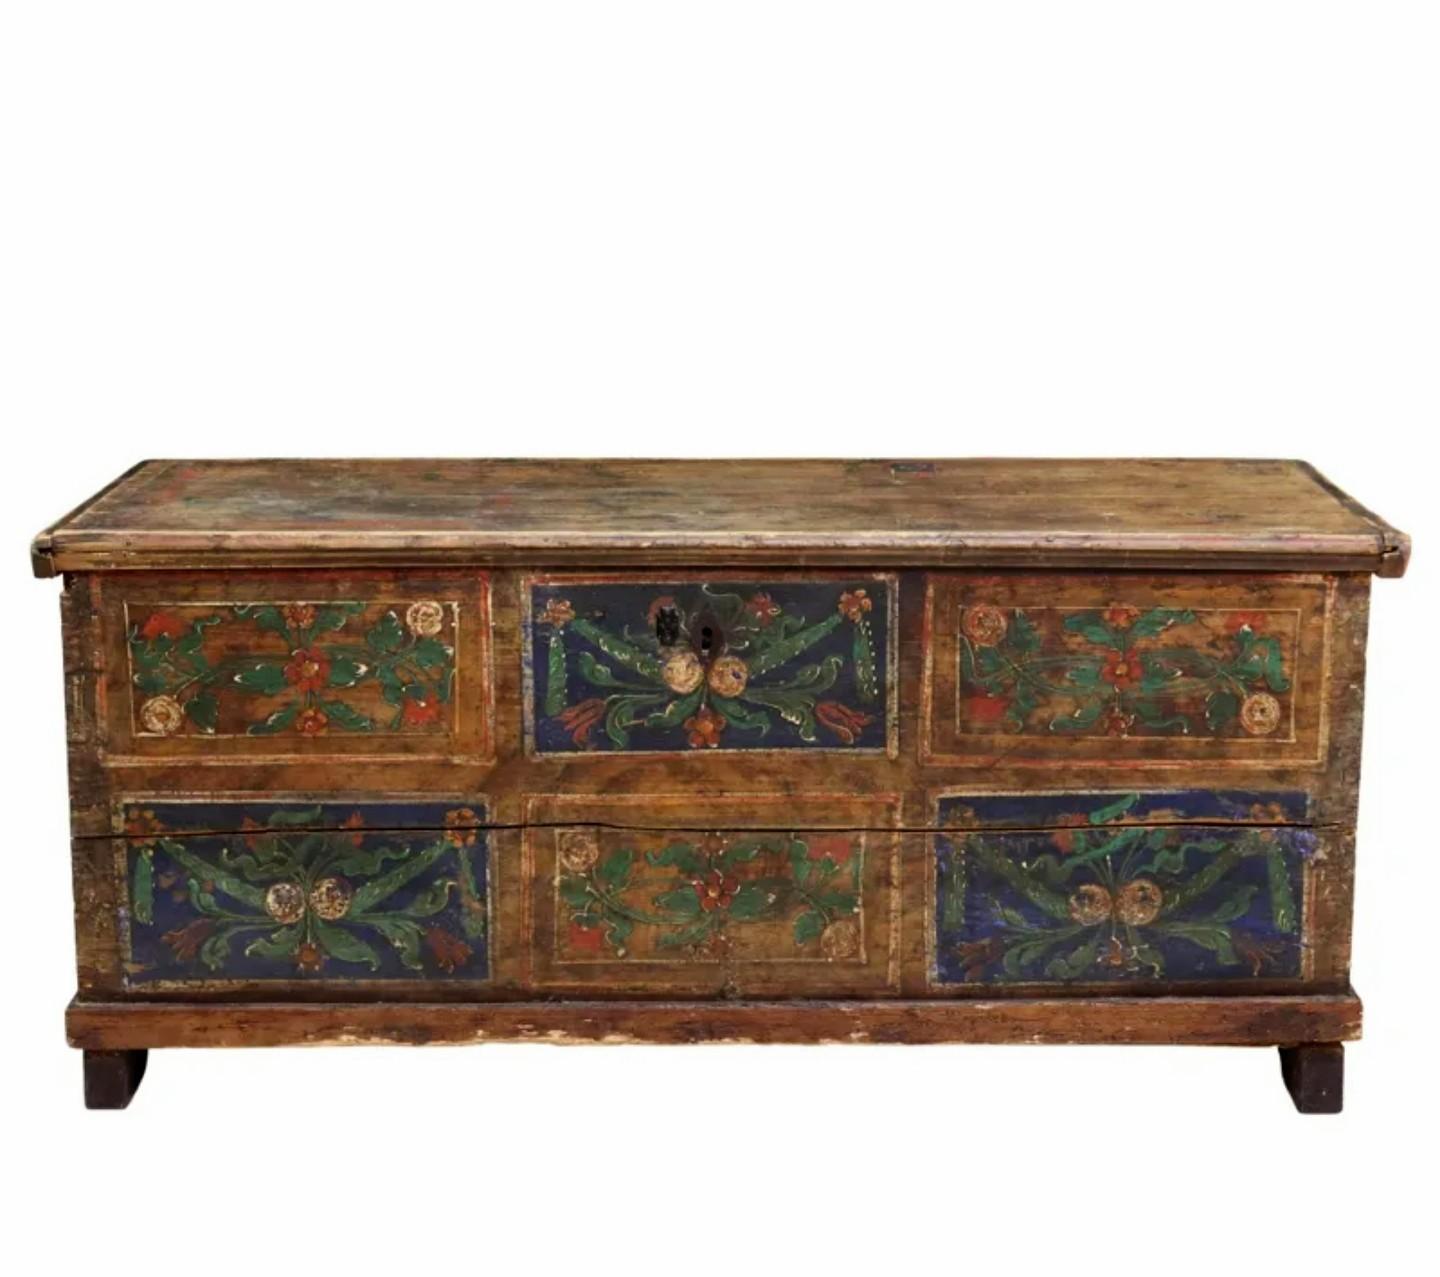 Hand-Crafted Early 19th Century Scandinavian Hand-Painted Pine Blanket Chest For Sale